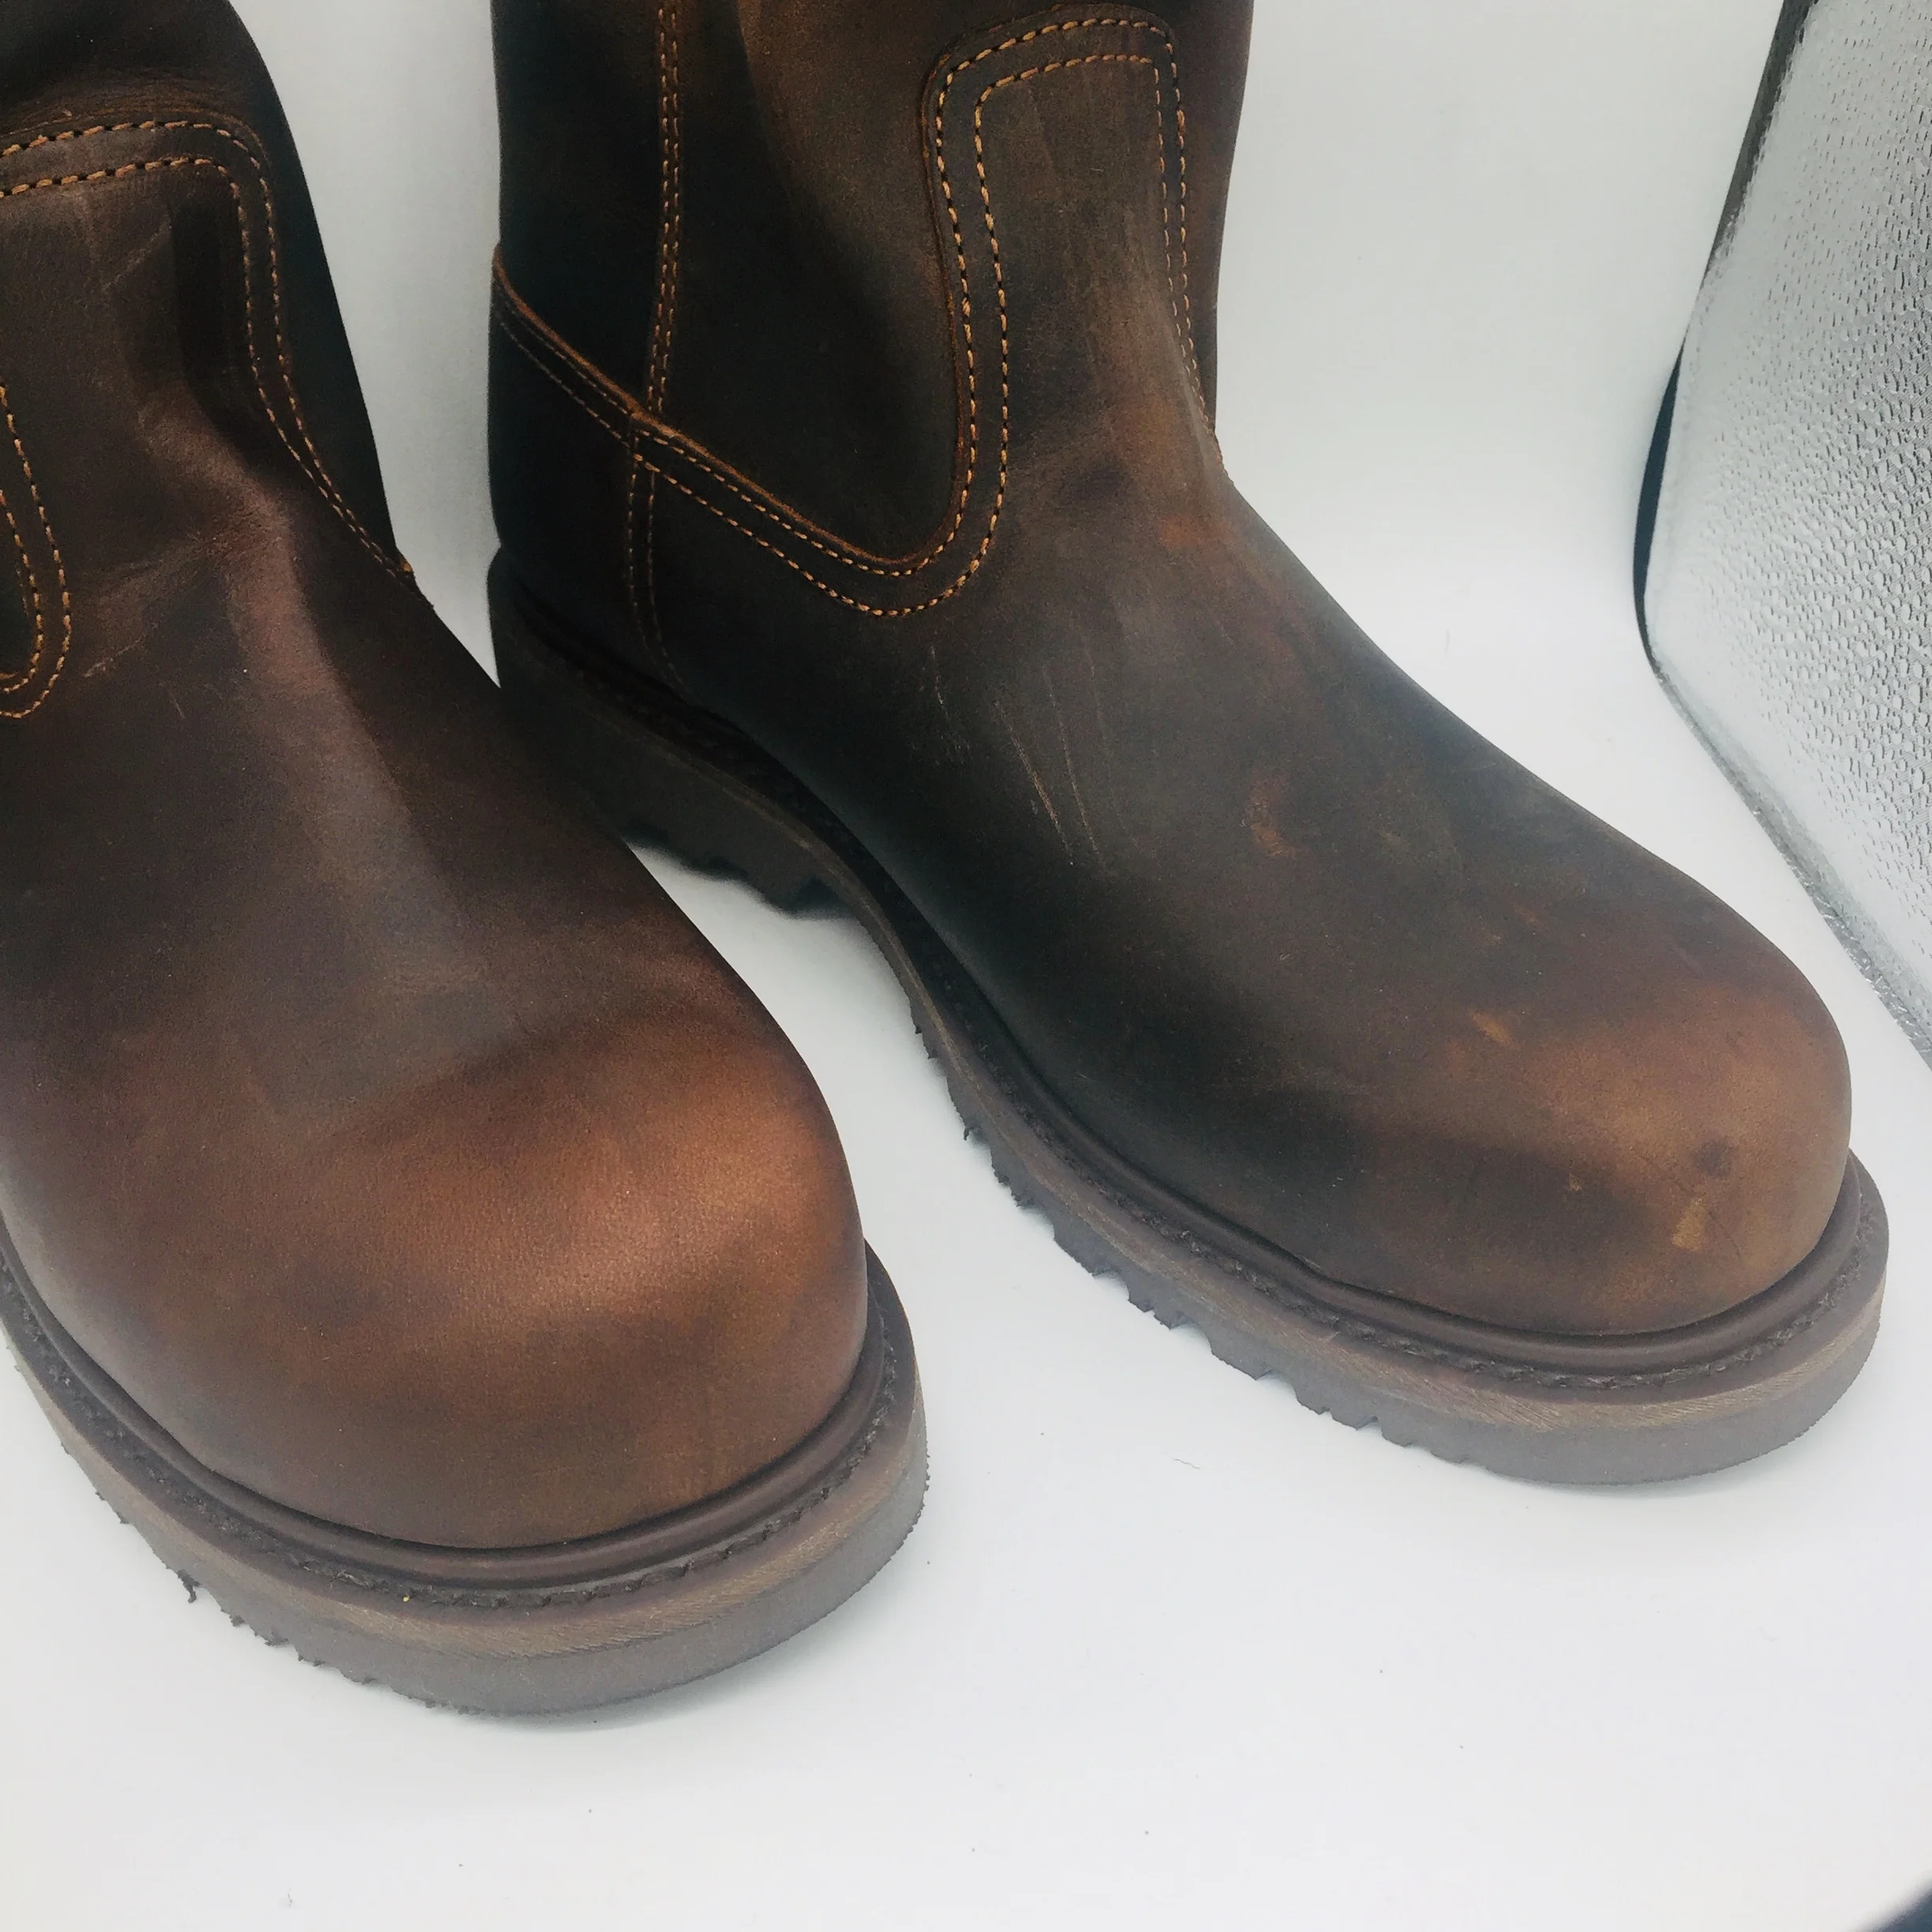 leather work boots